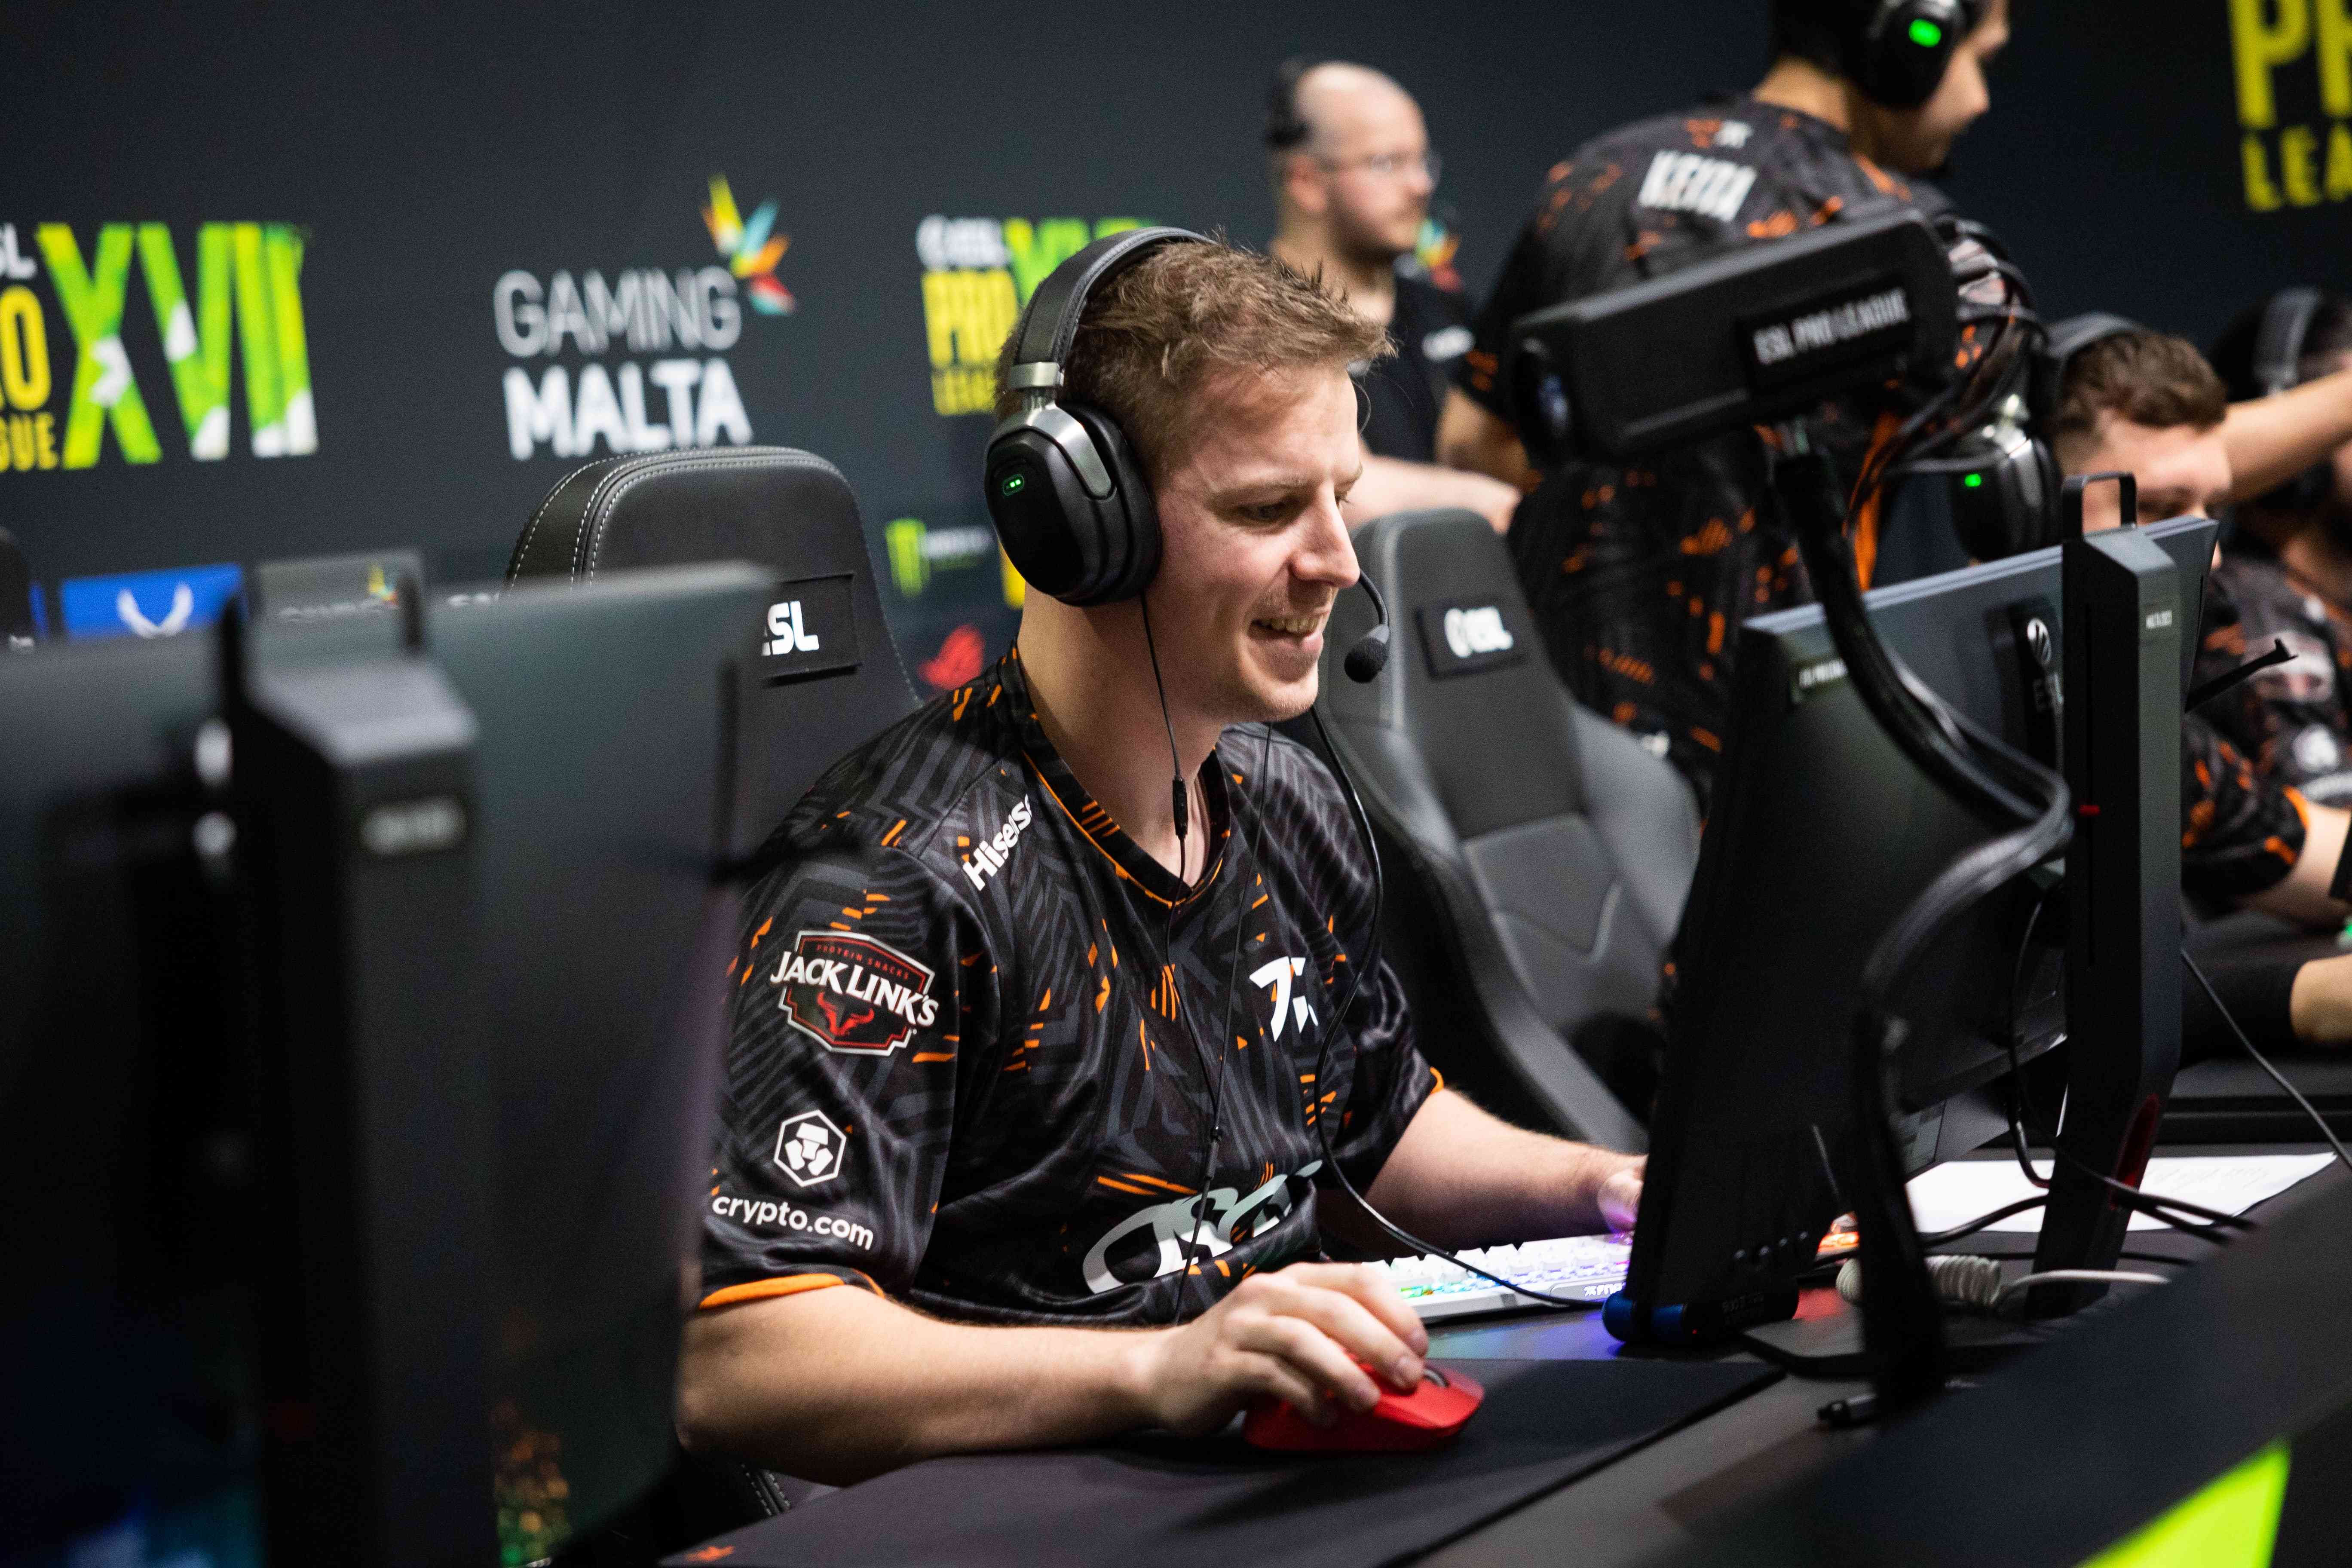 roeJ might be on the chopping block at fnatic as the organization looks to replace multiple players in the summer